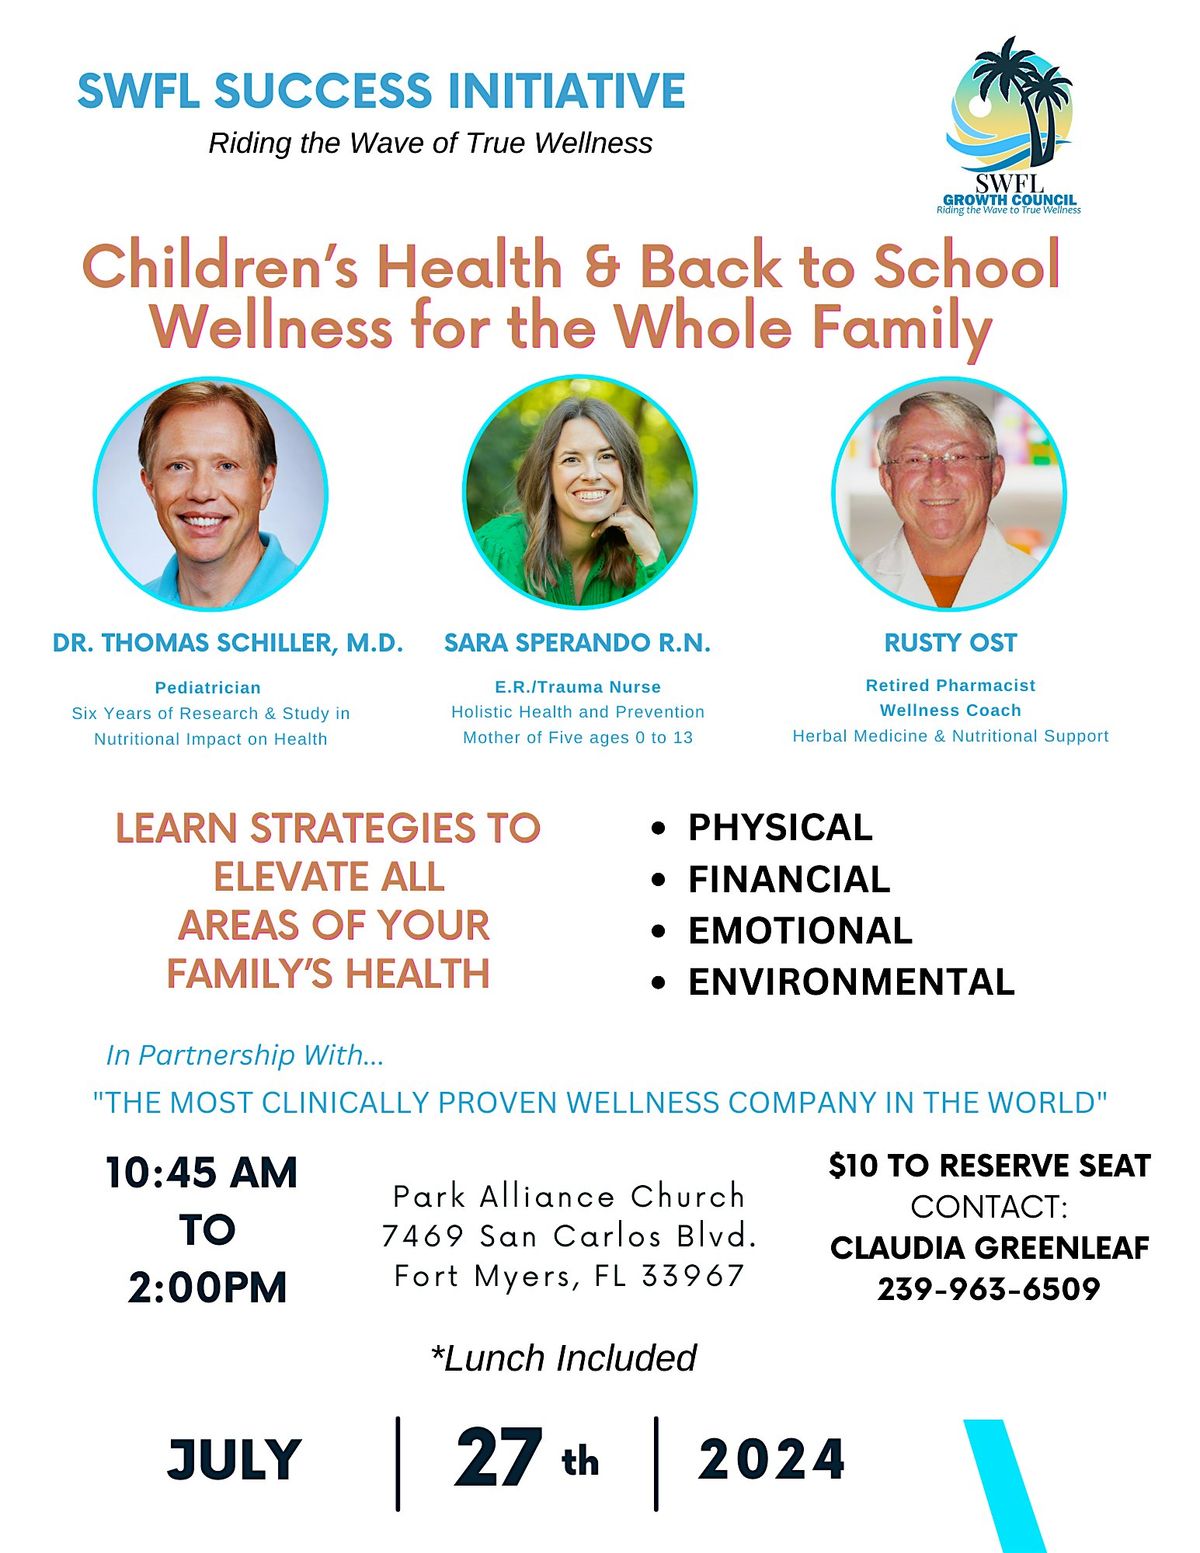 Children's Health & Back to School Wellness for the Whole Family